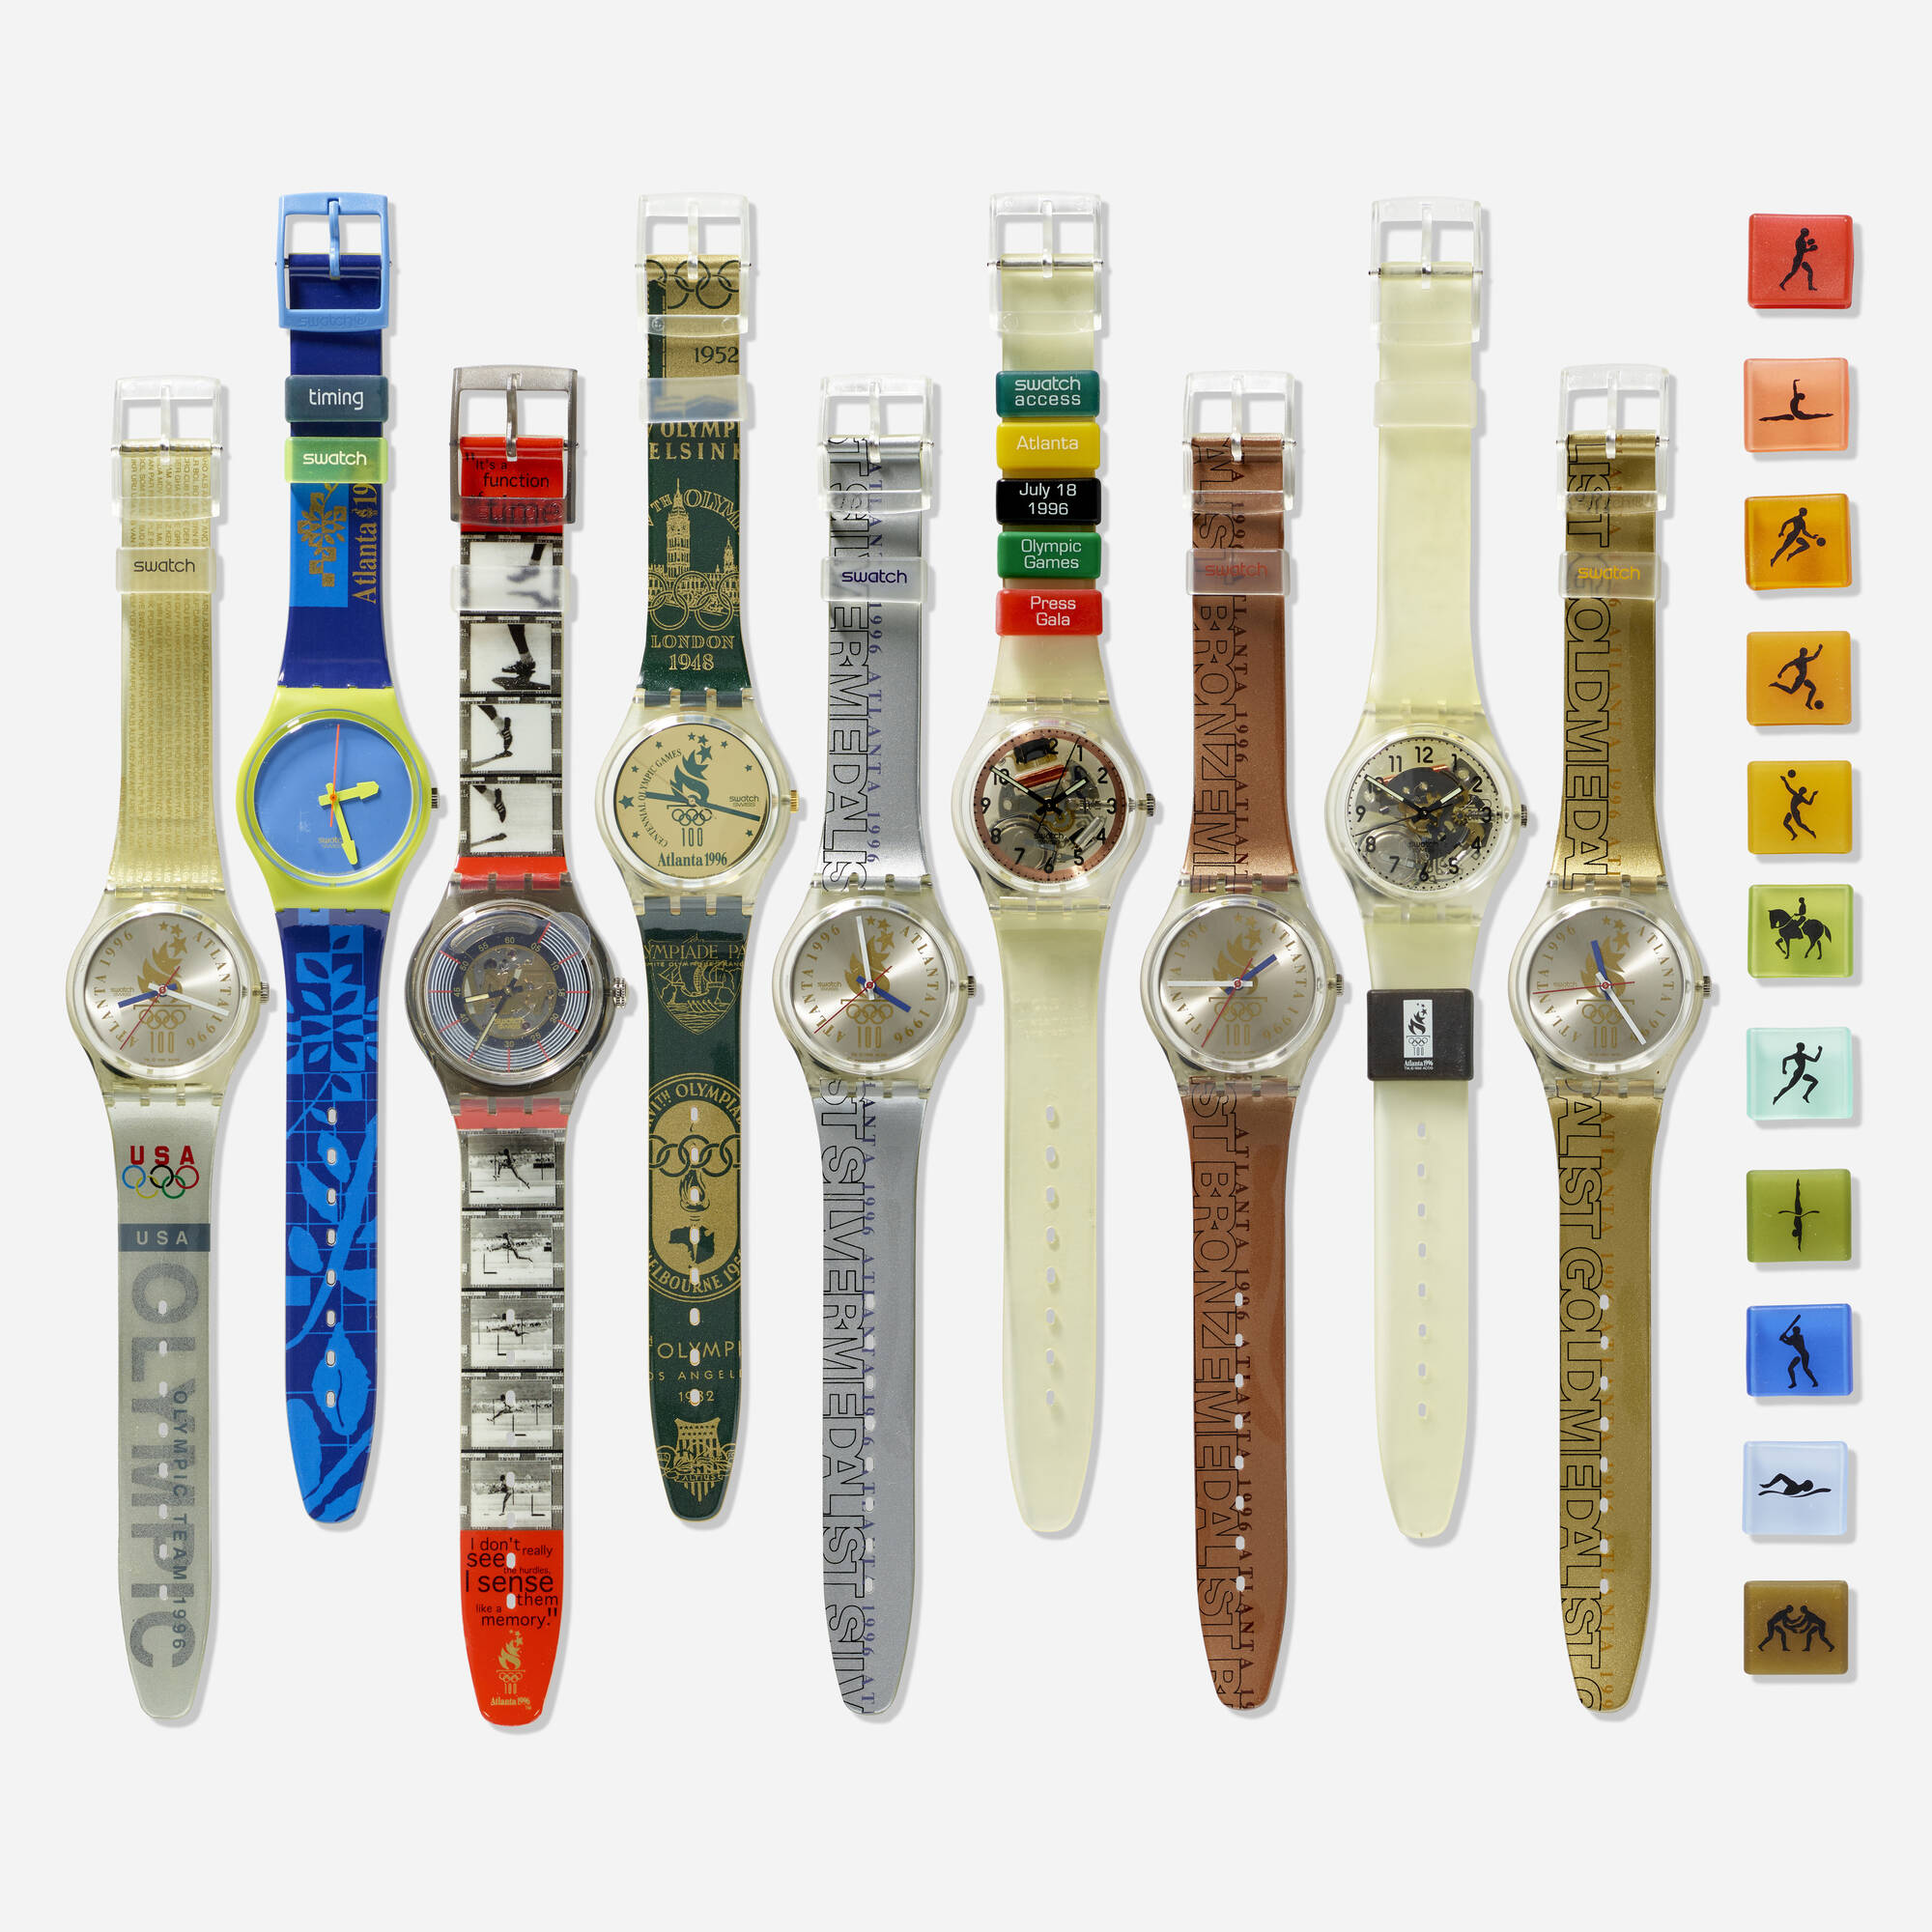 150: SWATCH, Atlanta 1996 Olympic Games Collection (nine watches